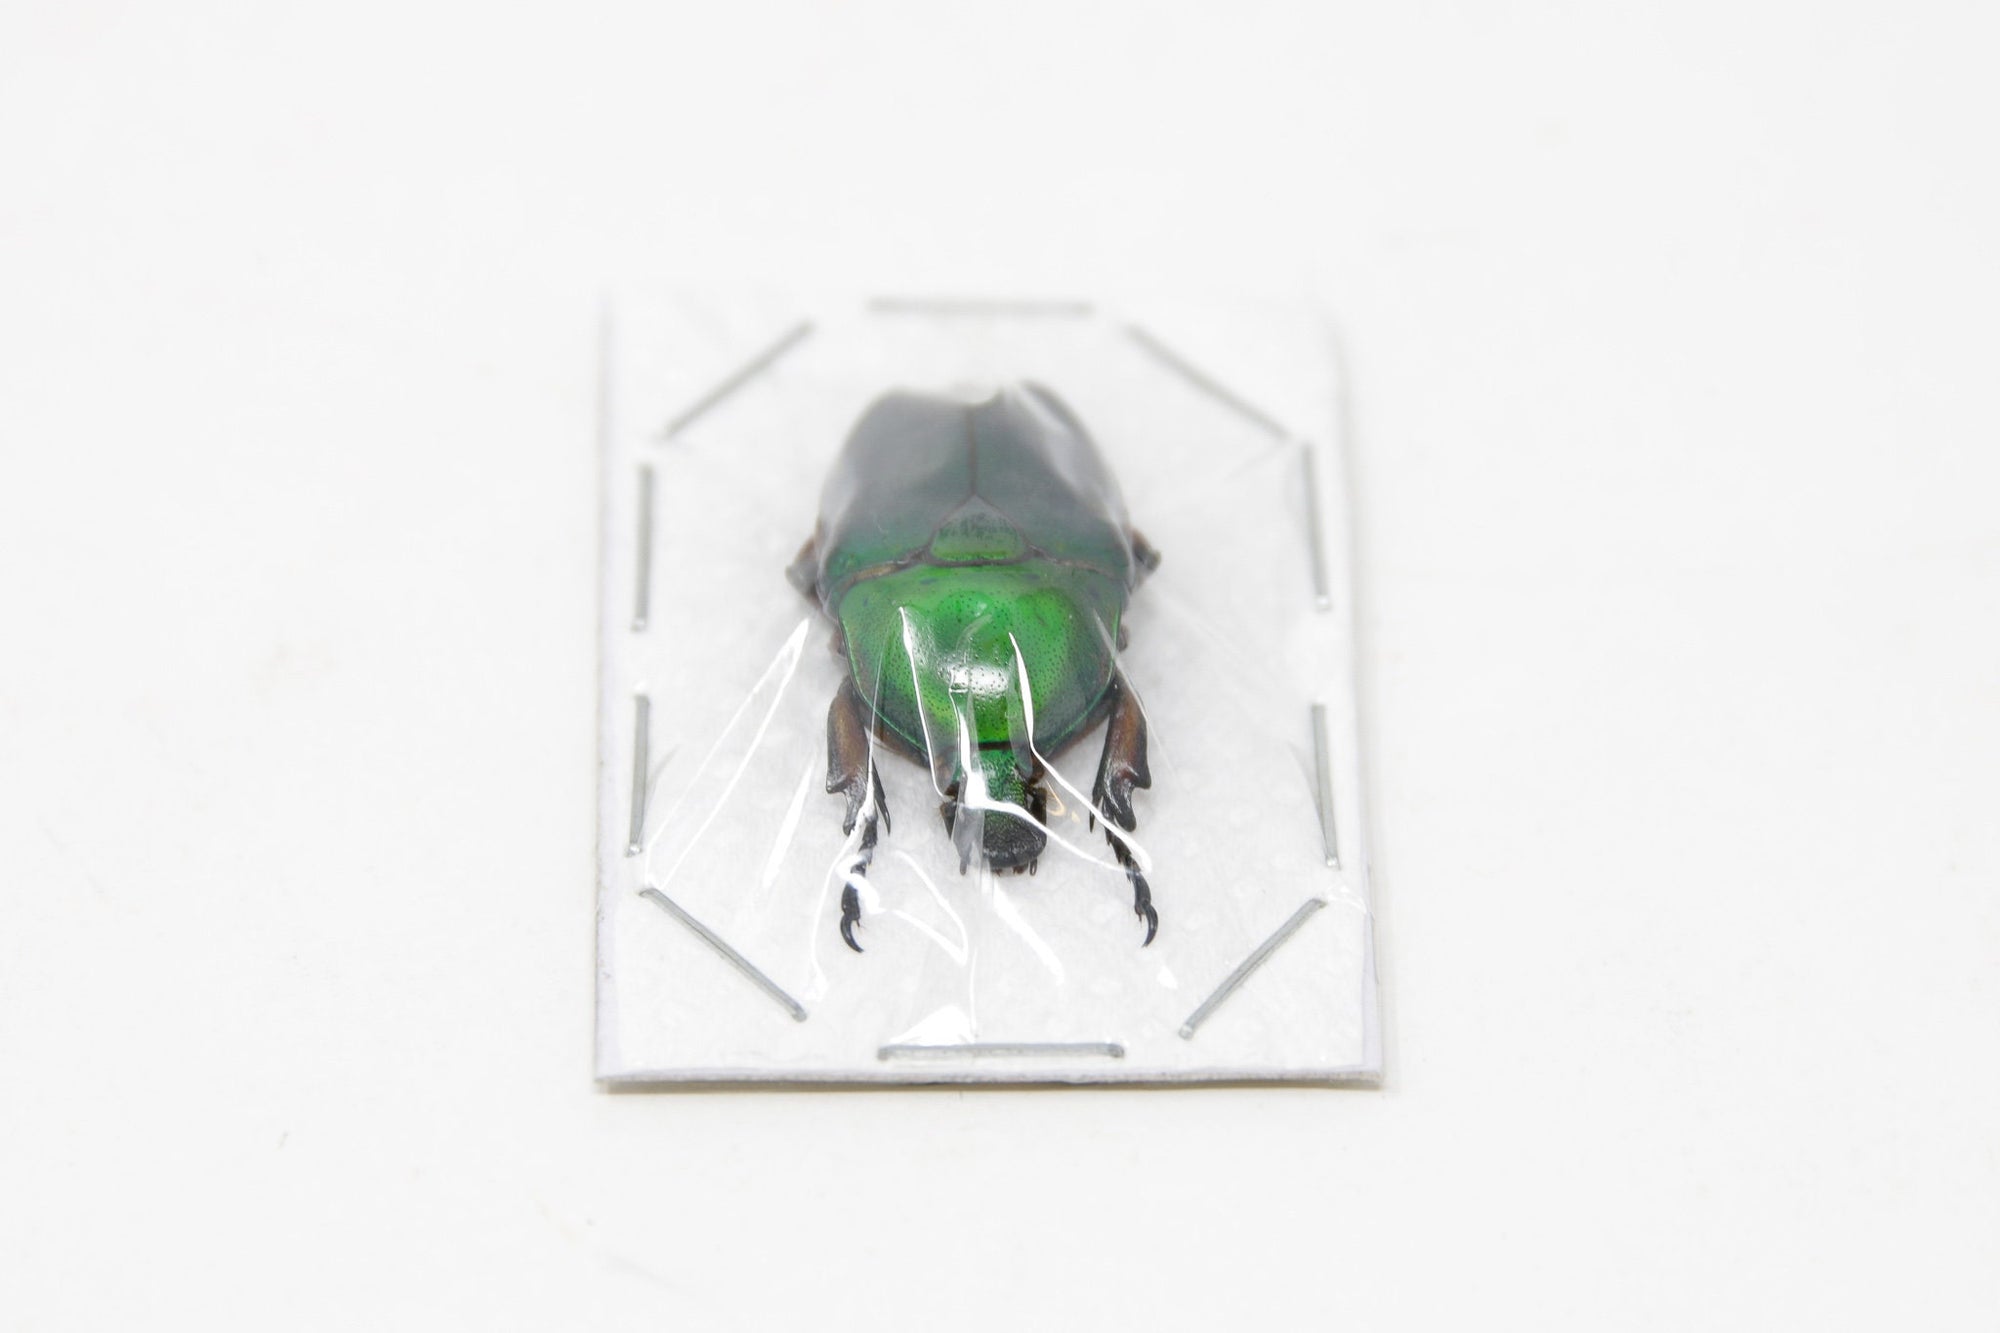 TWO (2) Green Flower Beetles | Euchloropus laetus | Ethical Insect Specimens for Entomology and Art